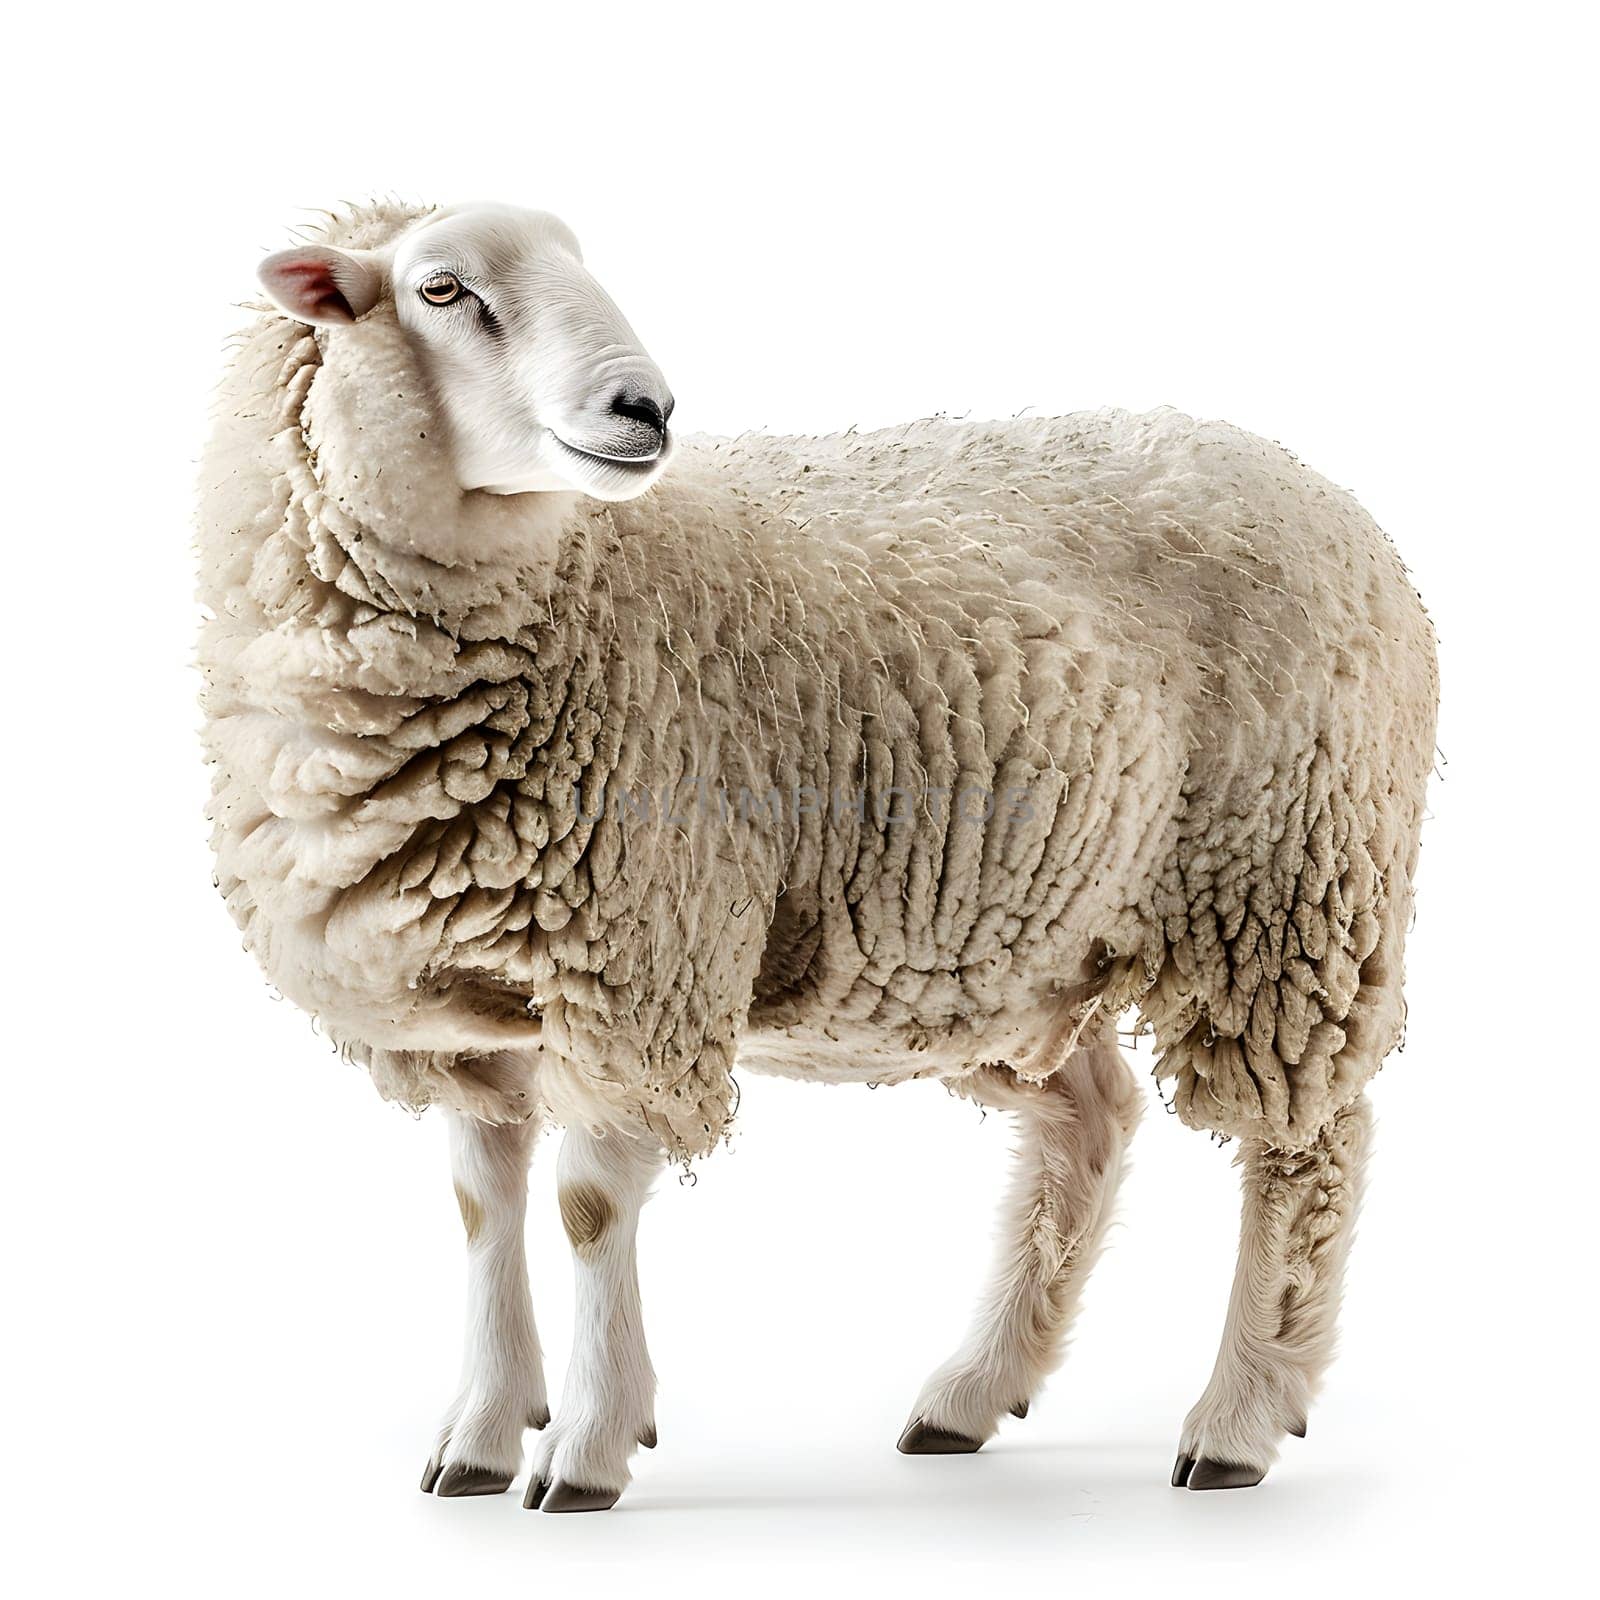 A terrestrial animal, the sheep is standing on a white background, its fur looking fluffy and its tail visible. The livestock is gazing directly at the camera